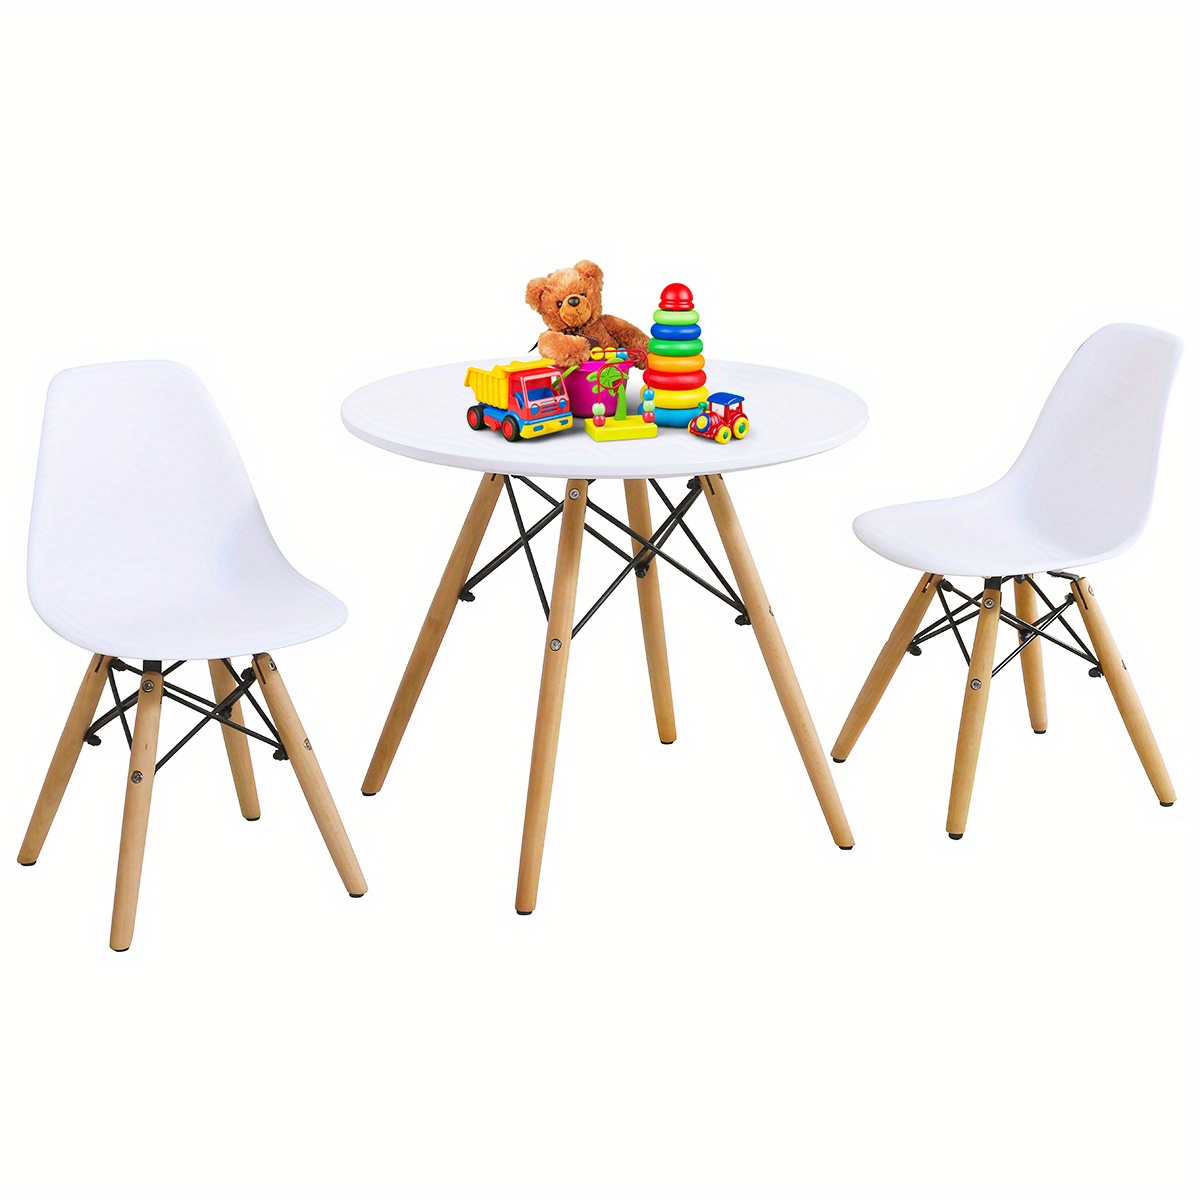 

Lifezeal Kids Mid-century Modern Dining Table Set Round Table With 2 Armless Chairs White